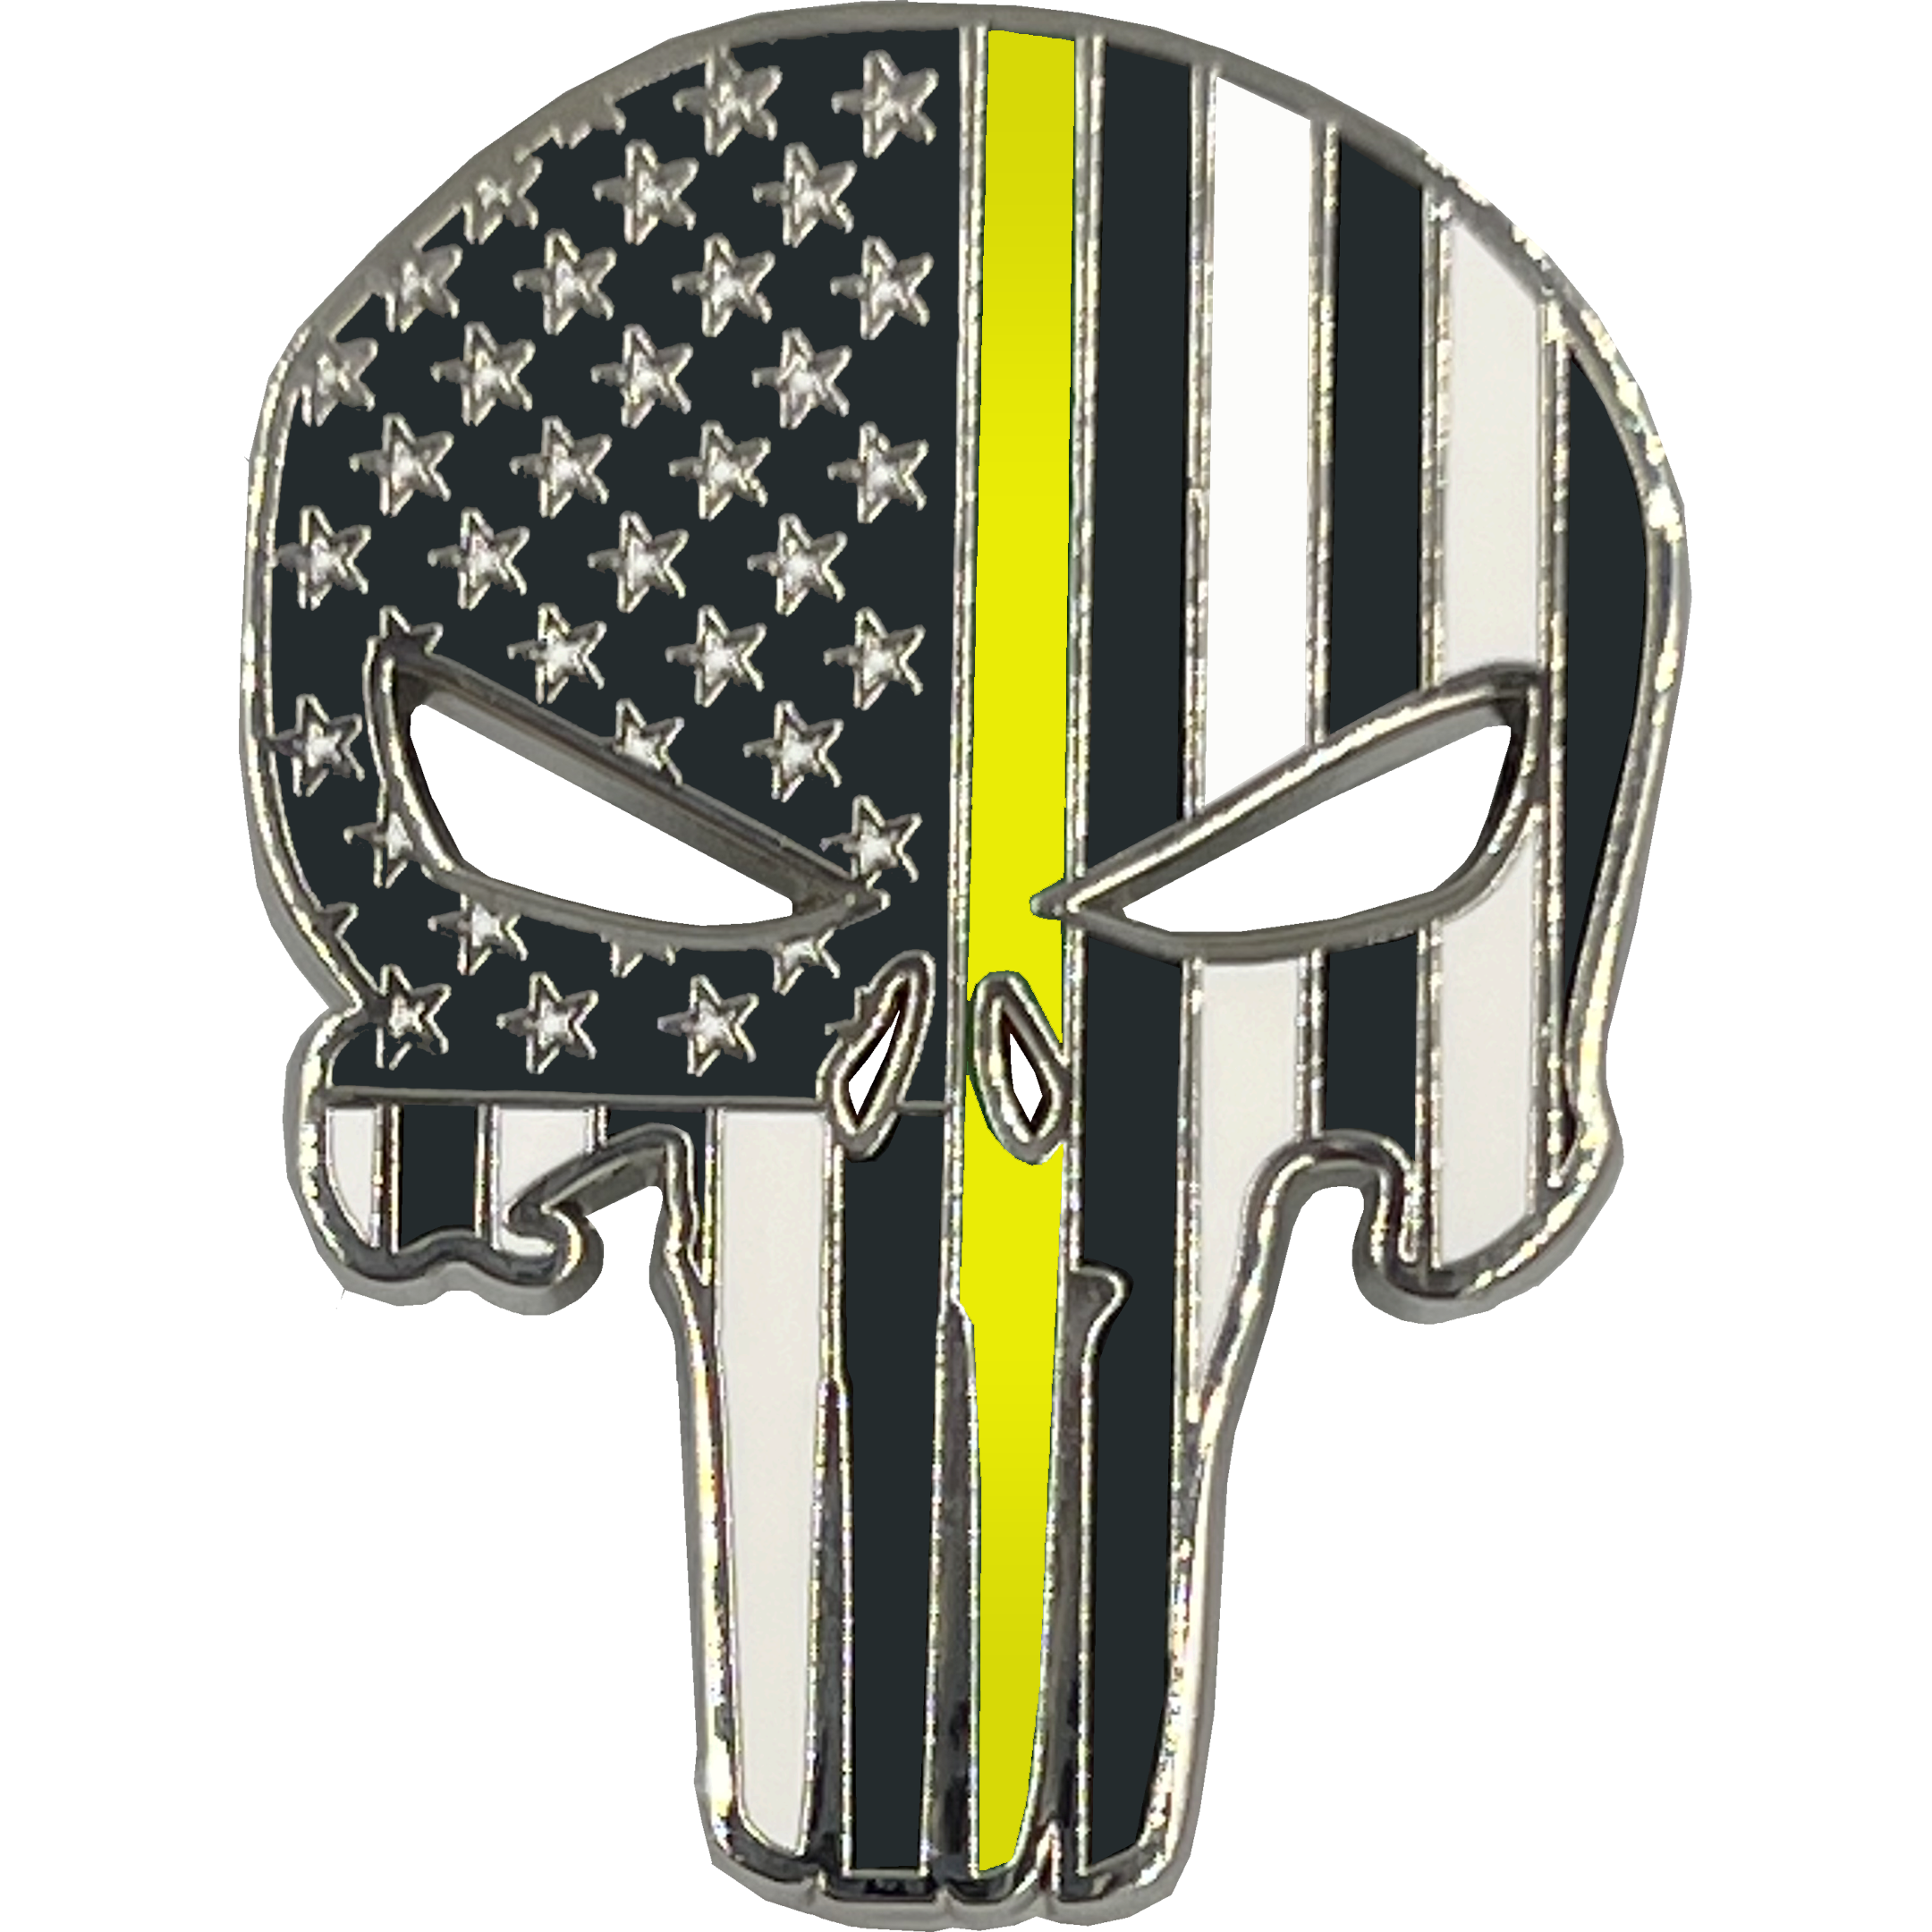 PBX-003-A Thin Gold Line American Flag Pin Police Emergency 911 Dispatcher with die-cut eyes yellow trucker and dual pin posts and deluxe locking clasps